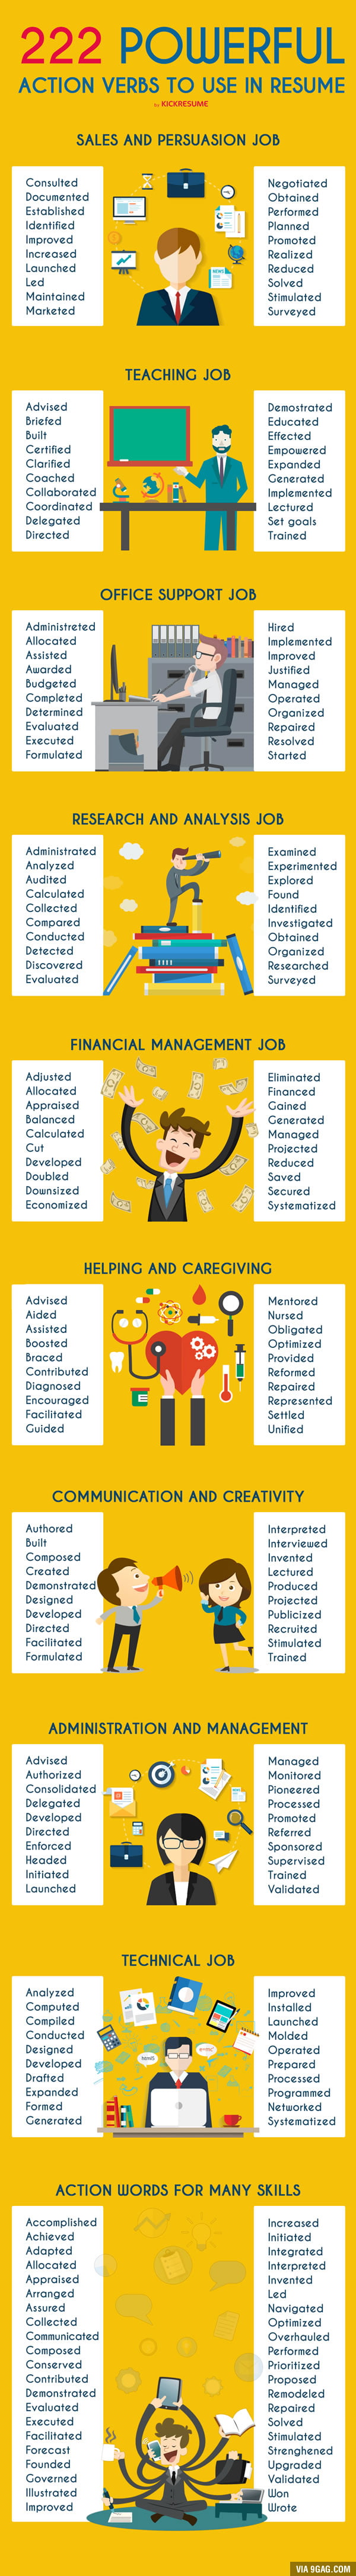 resume cheat sheet  222 action verbs to use in your new resume